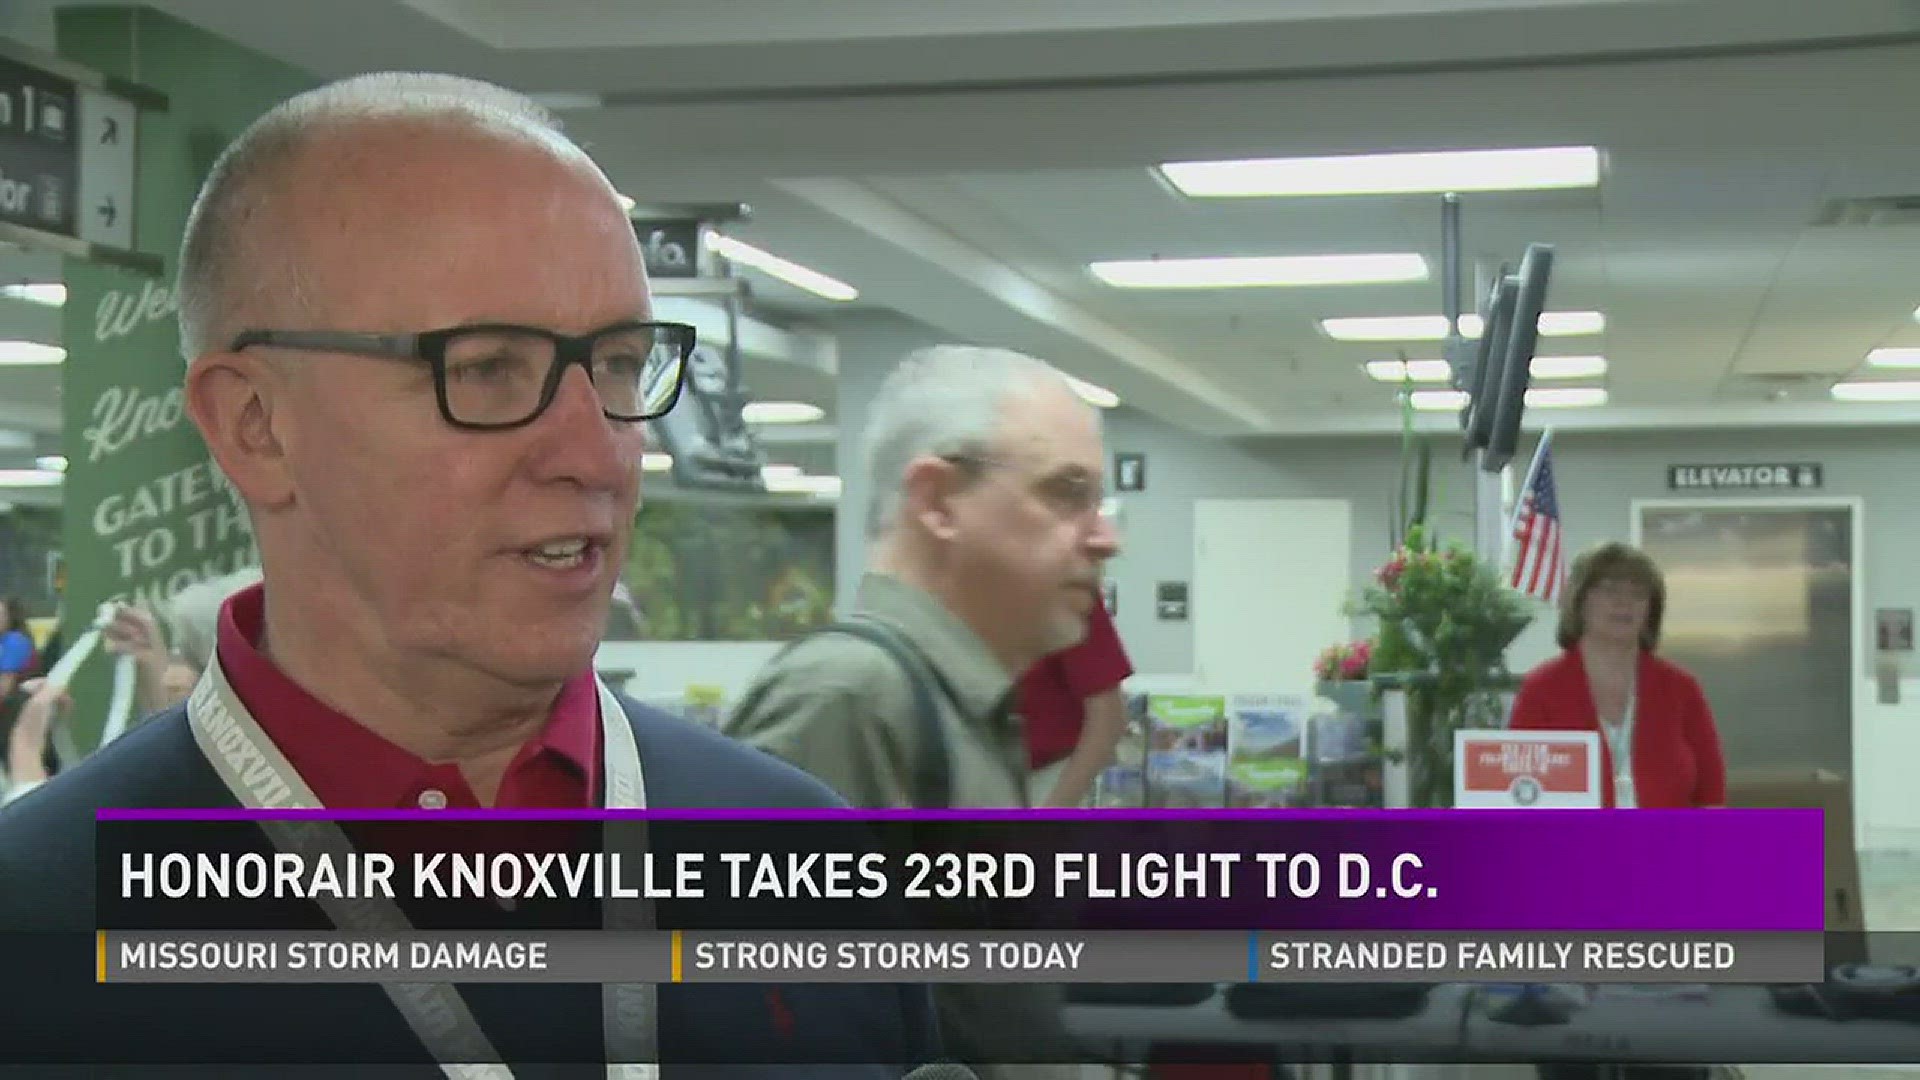 HonorAir's 23rd flight departed from McGhee Tyson Airport to Washington, D.C. on Wednesday morning.